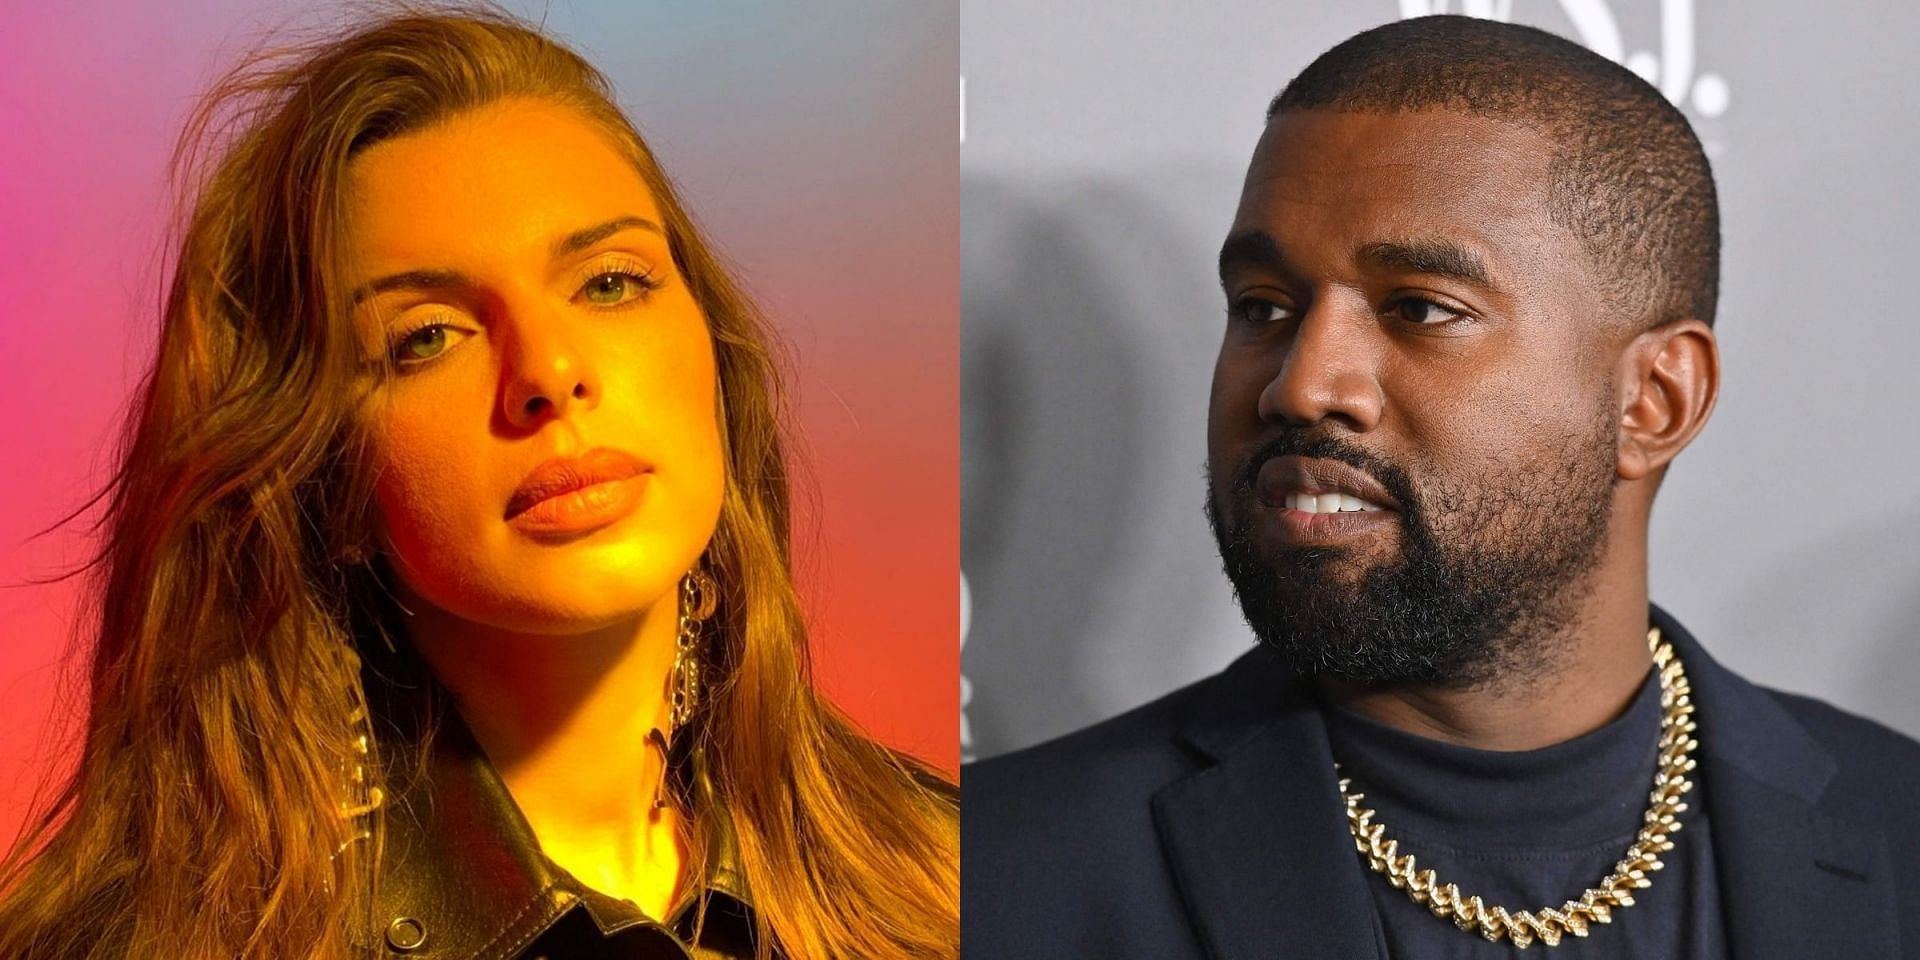 Julia Fox and Kanye West (Image via juliafox/Instagram/Eric Johnson, and Angela Weiss/AFP/Getty Images)